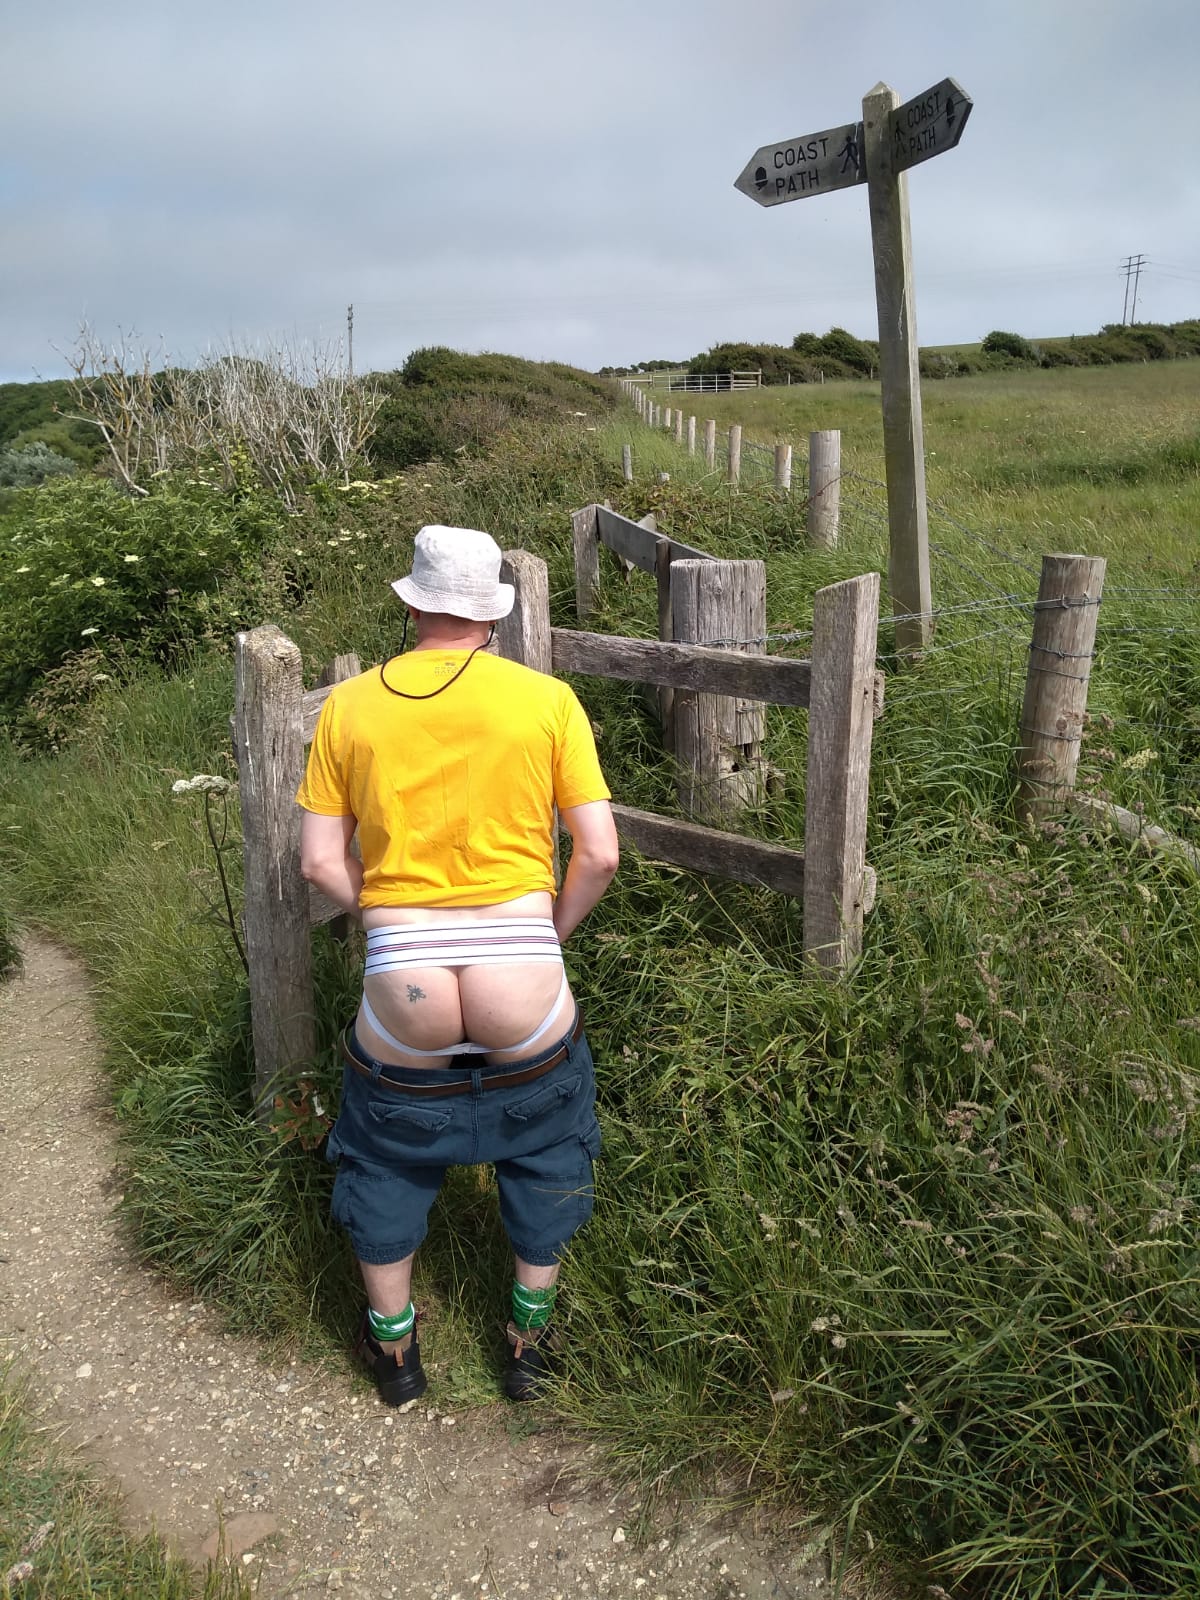 On a country walk and my shorts fall down (again)!